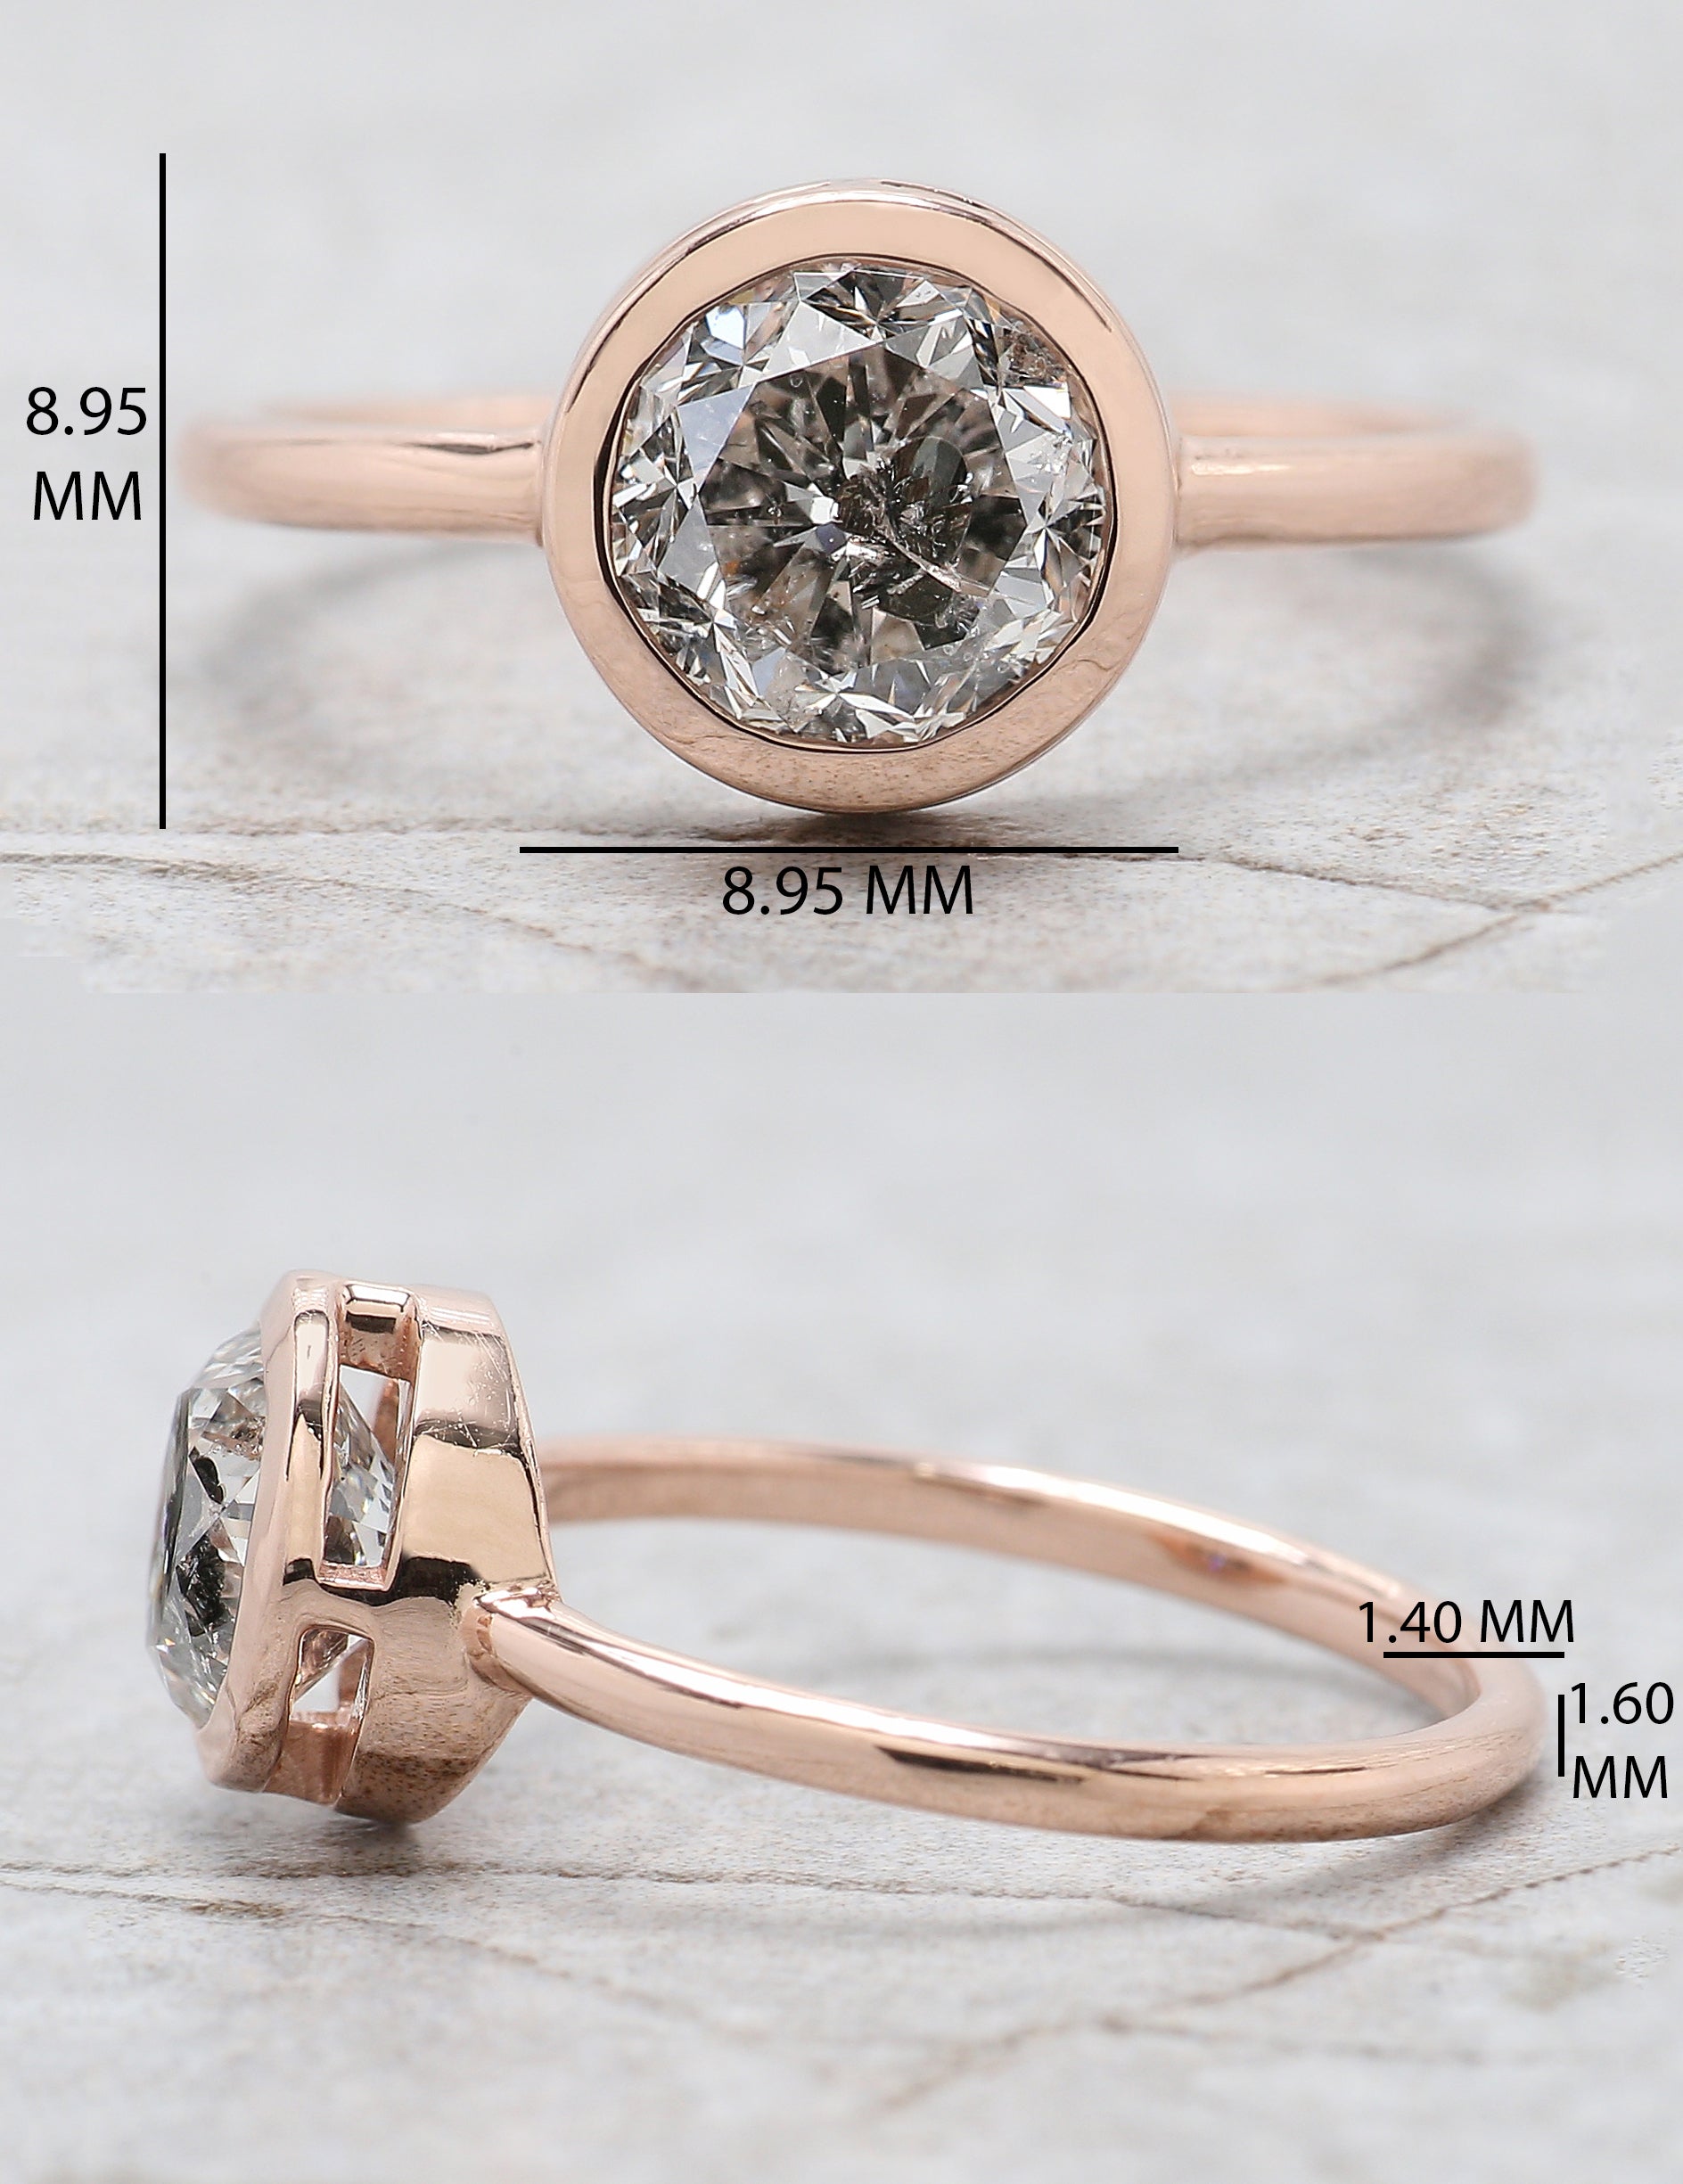 Round Cut Salt And Pepper Diamond Ring 1.55 Ct 7.05 MM Round Diamond Ring 14K Solid Rose Gold Silver Engagement Ring Gift For Her QL2650